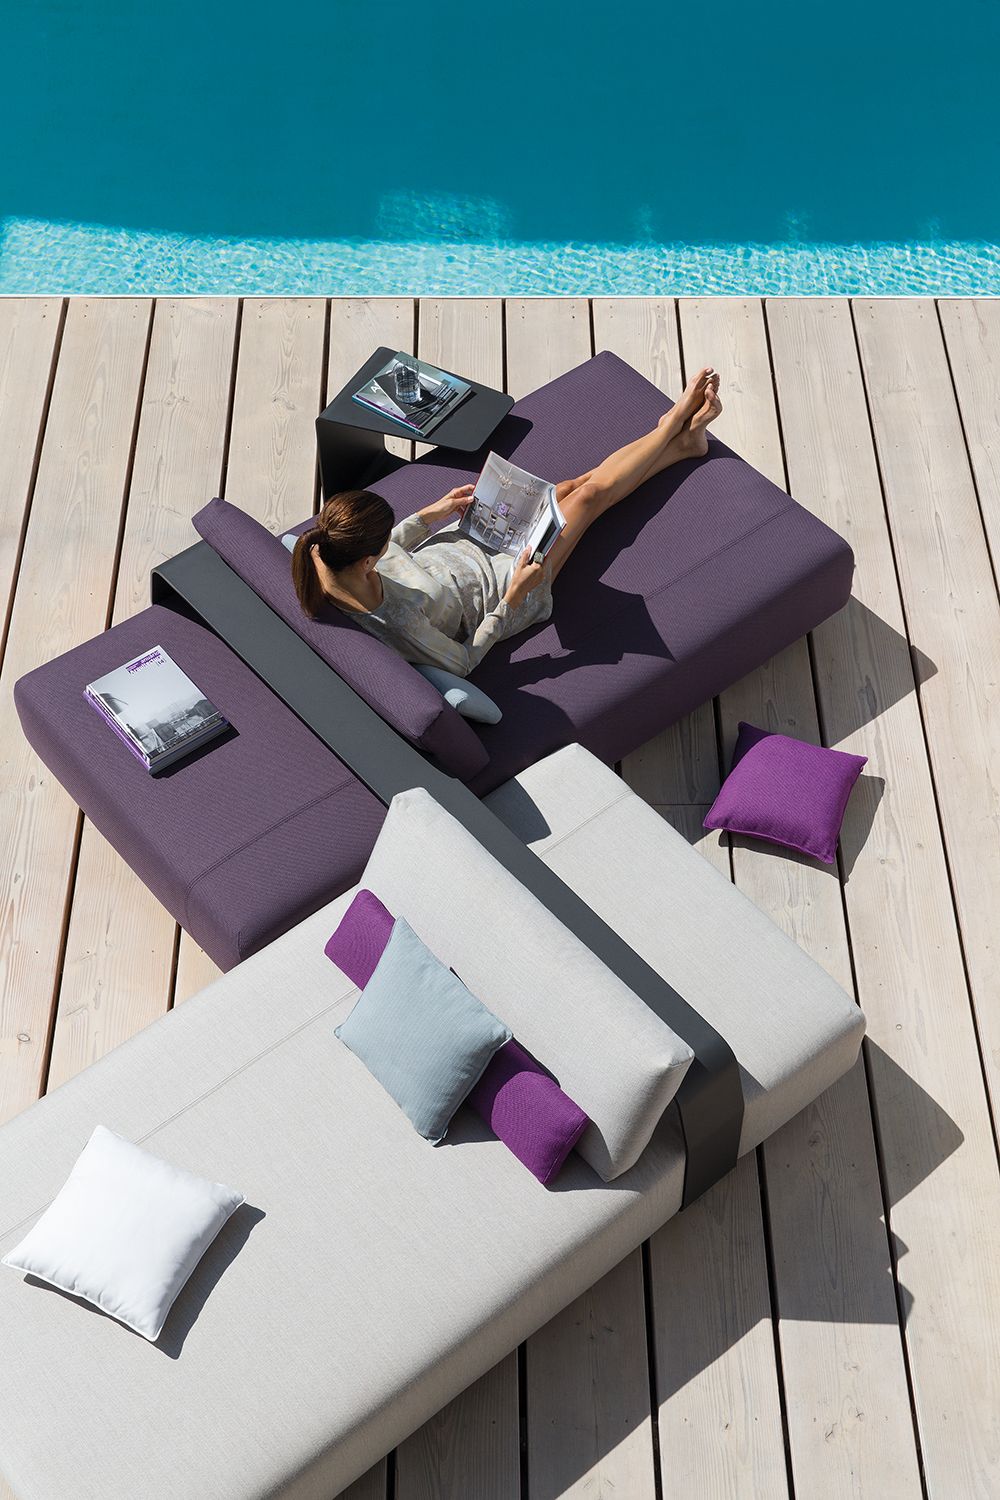 Top Trends in Outdoor Pool Furniture for
Your Backyard Oasis